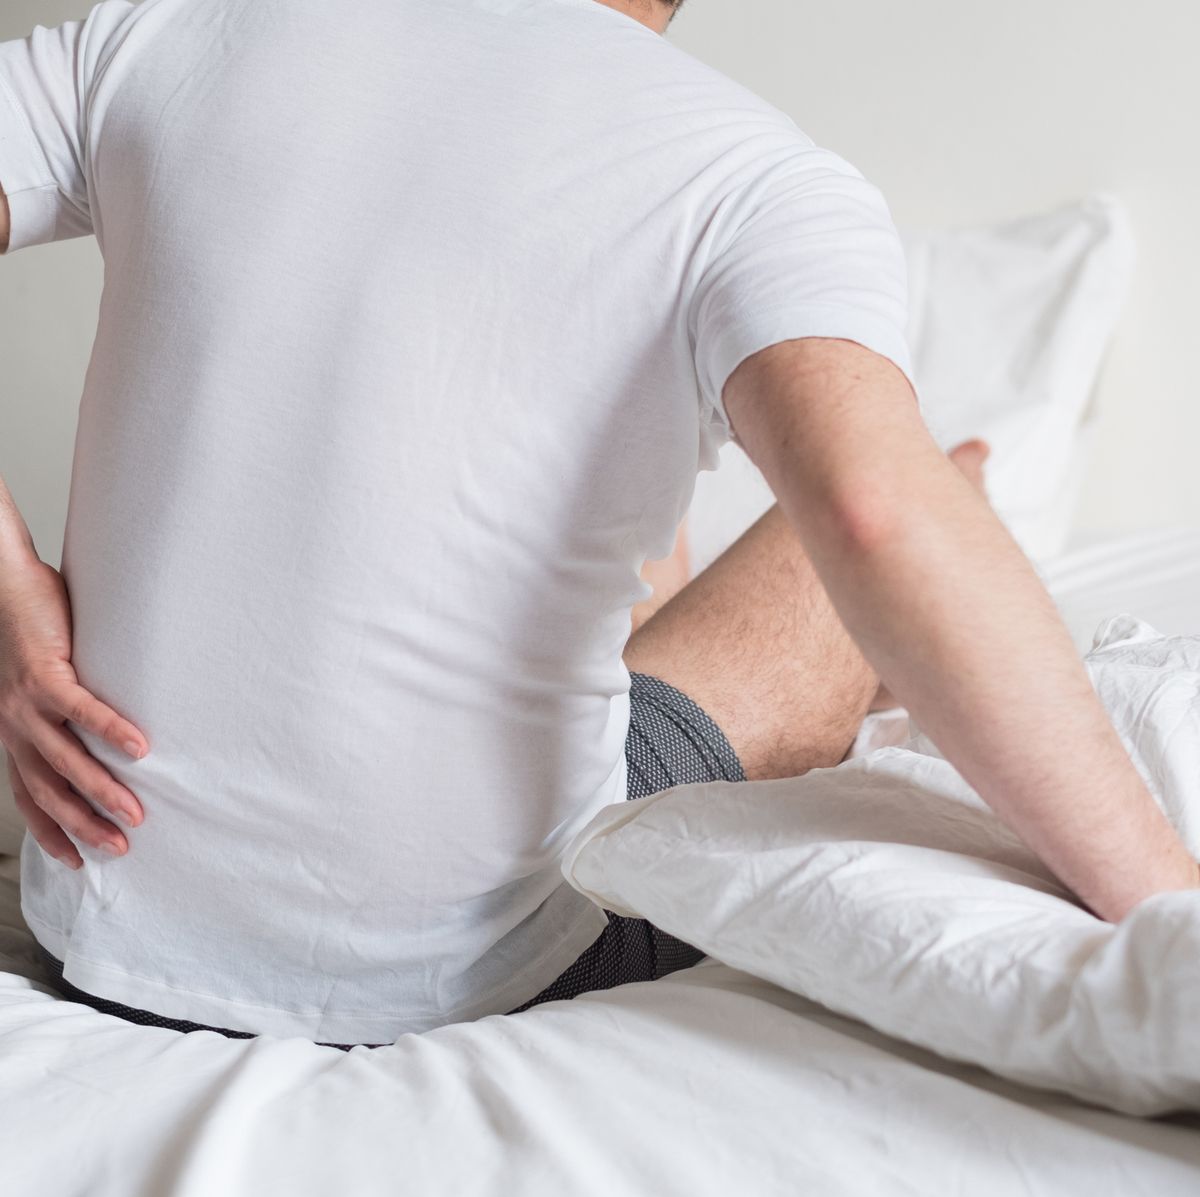 The Sciatic Pain Relief Cushion - A new way to relieve sciatica